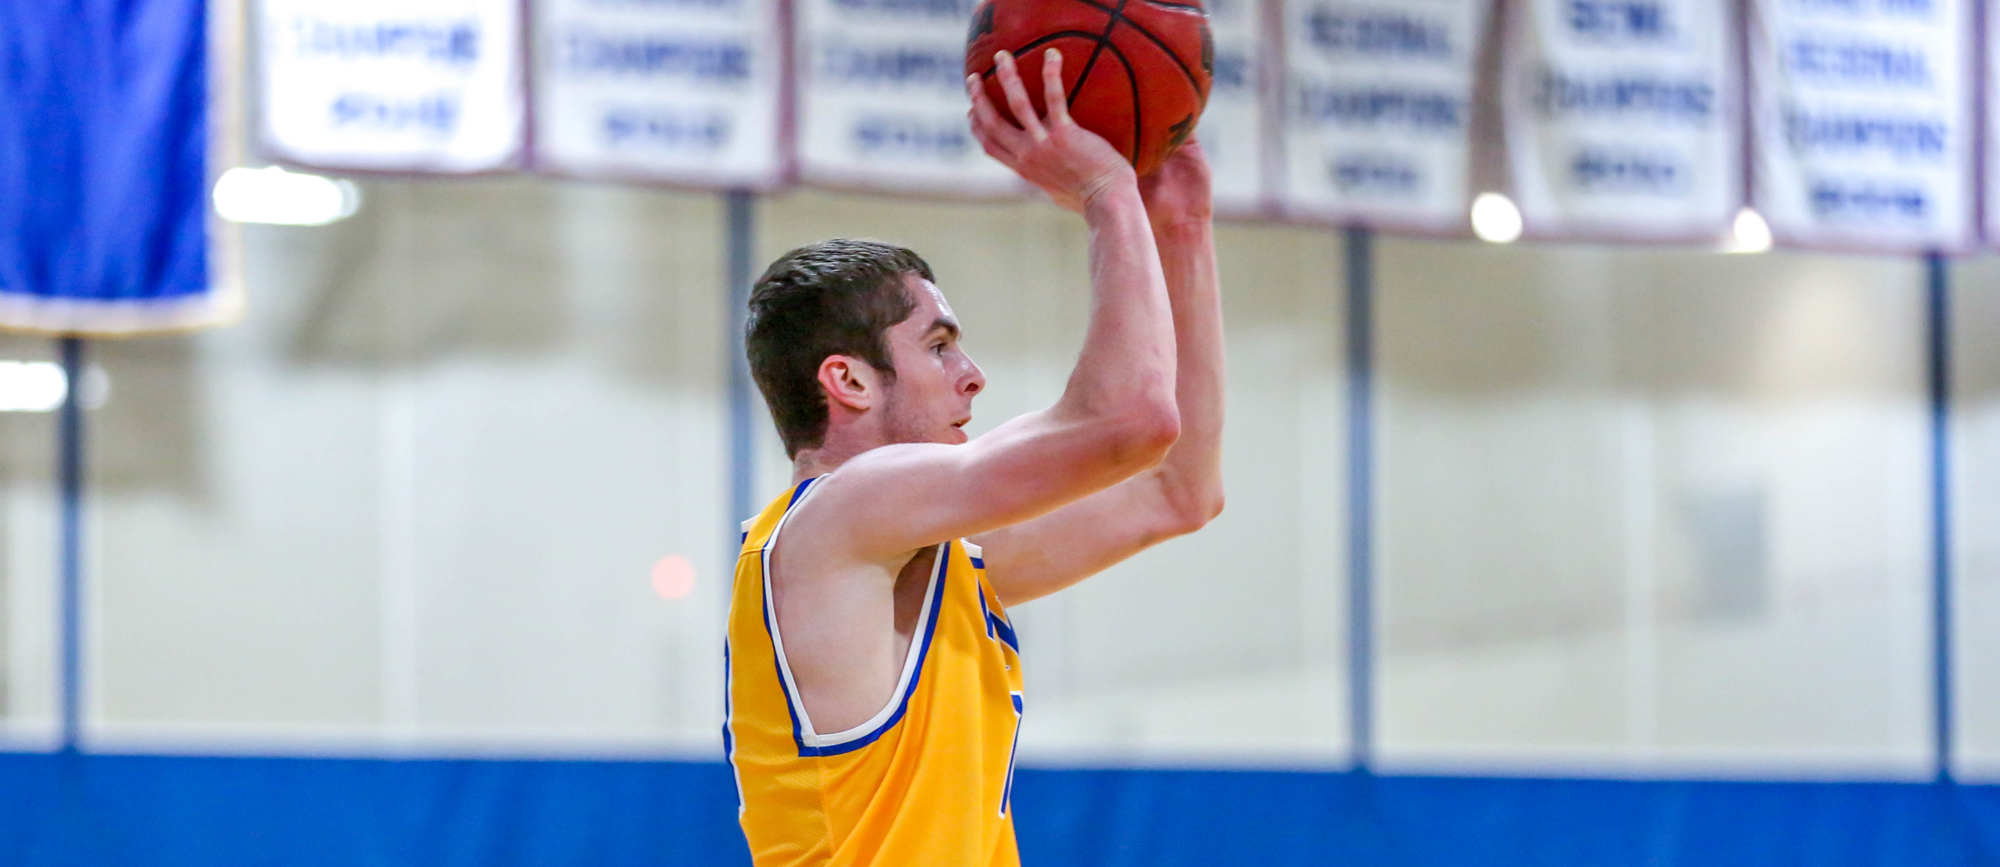 Sophomore guard Mike McGuire scored a team-high 16 points in Western New England's 78-60 win over MCLA at the Ken Wright Invitational on Friday night in Amherst (photo by Geoff Riccio).